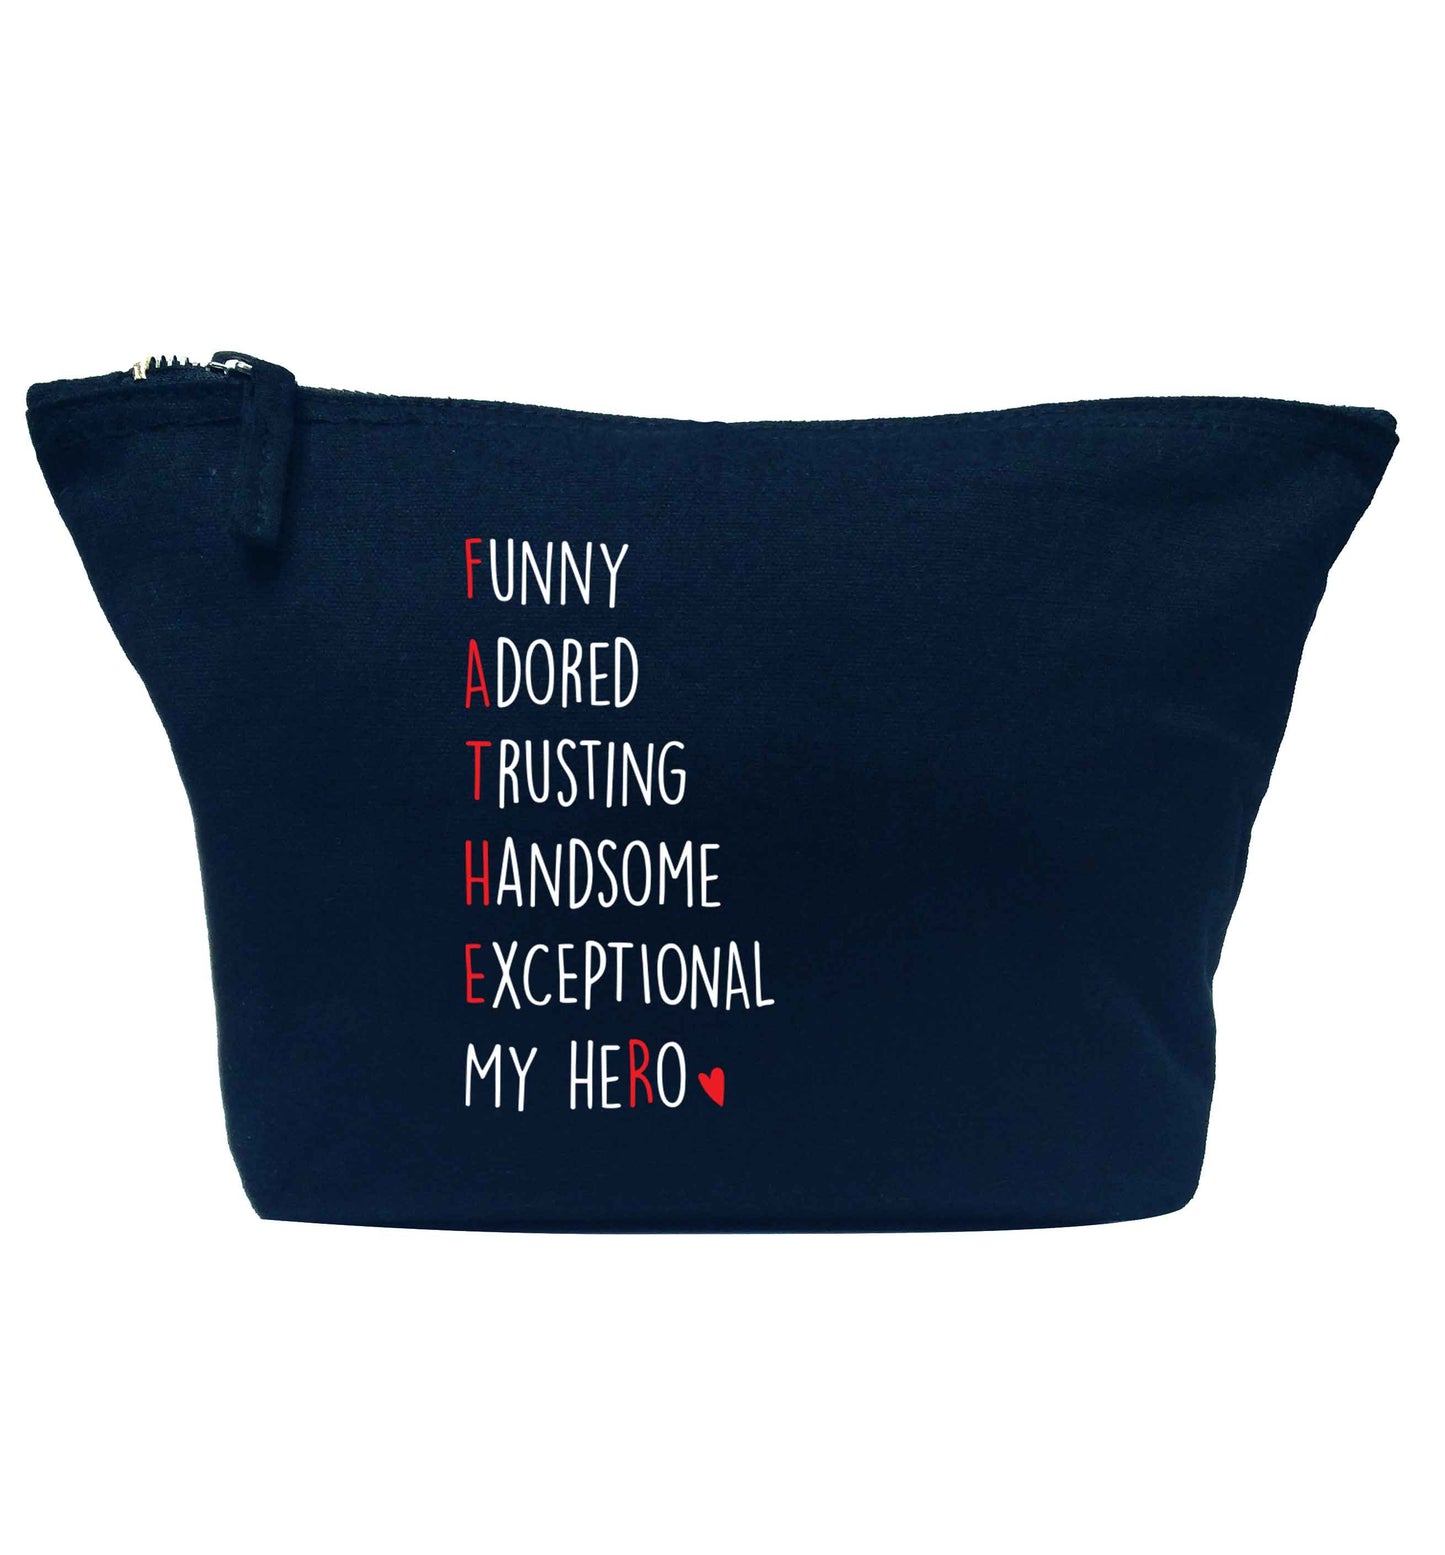 Father, funny adored trusting handsome exceptional my hero navy makeup bag